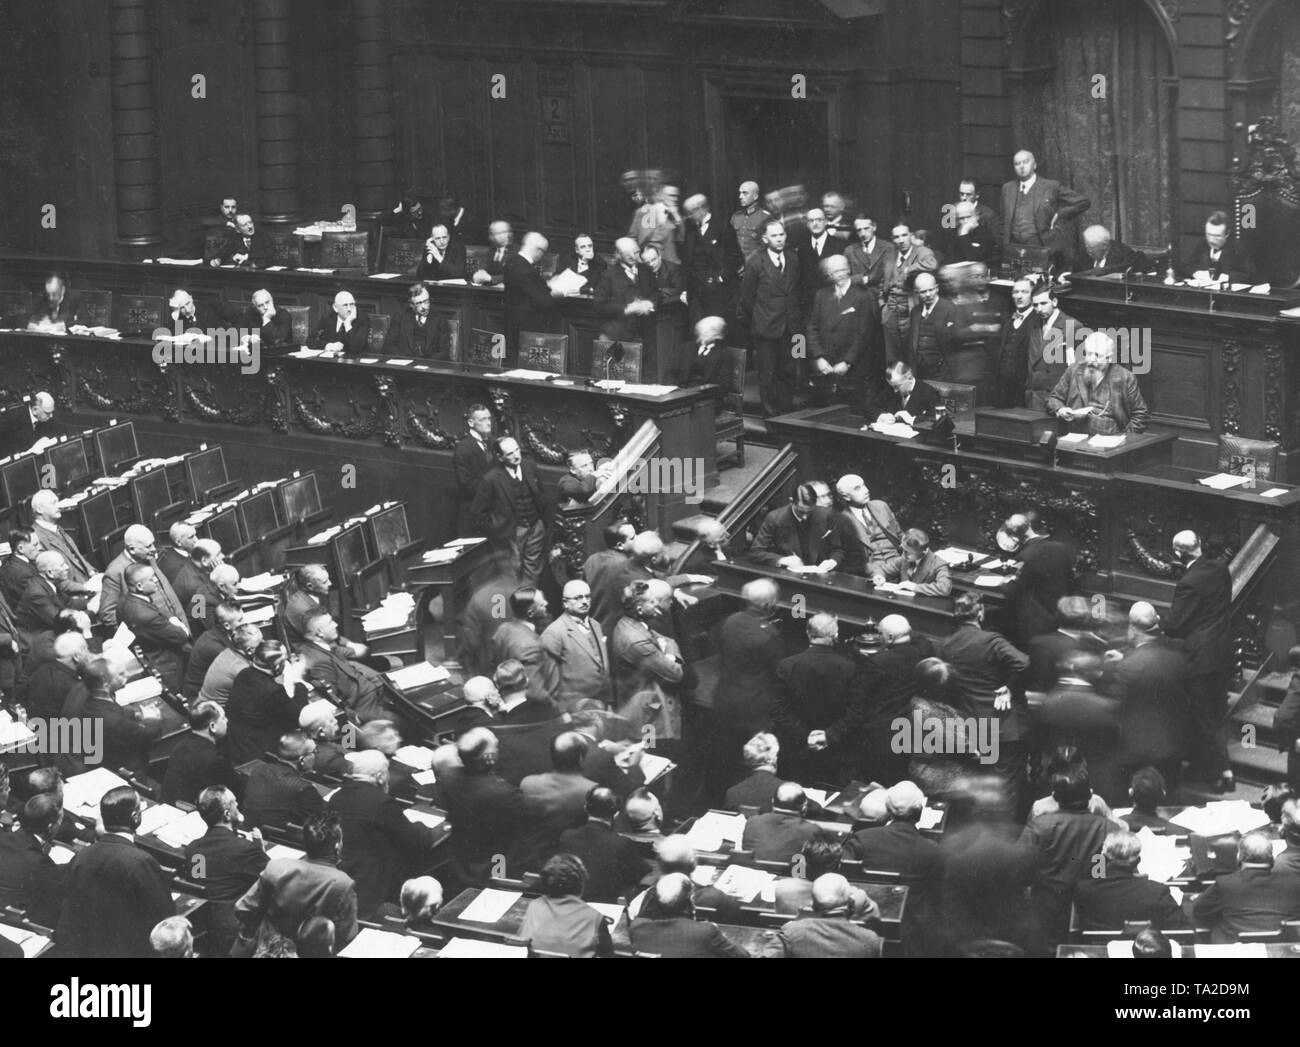 The deputy of the Centre Party, Thomas Esser (right half of the picture, at the lectern with a note in his hand) gives a speech at a Reichstag meeting. Stock Photo